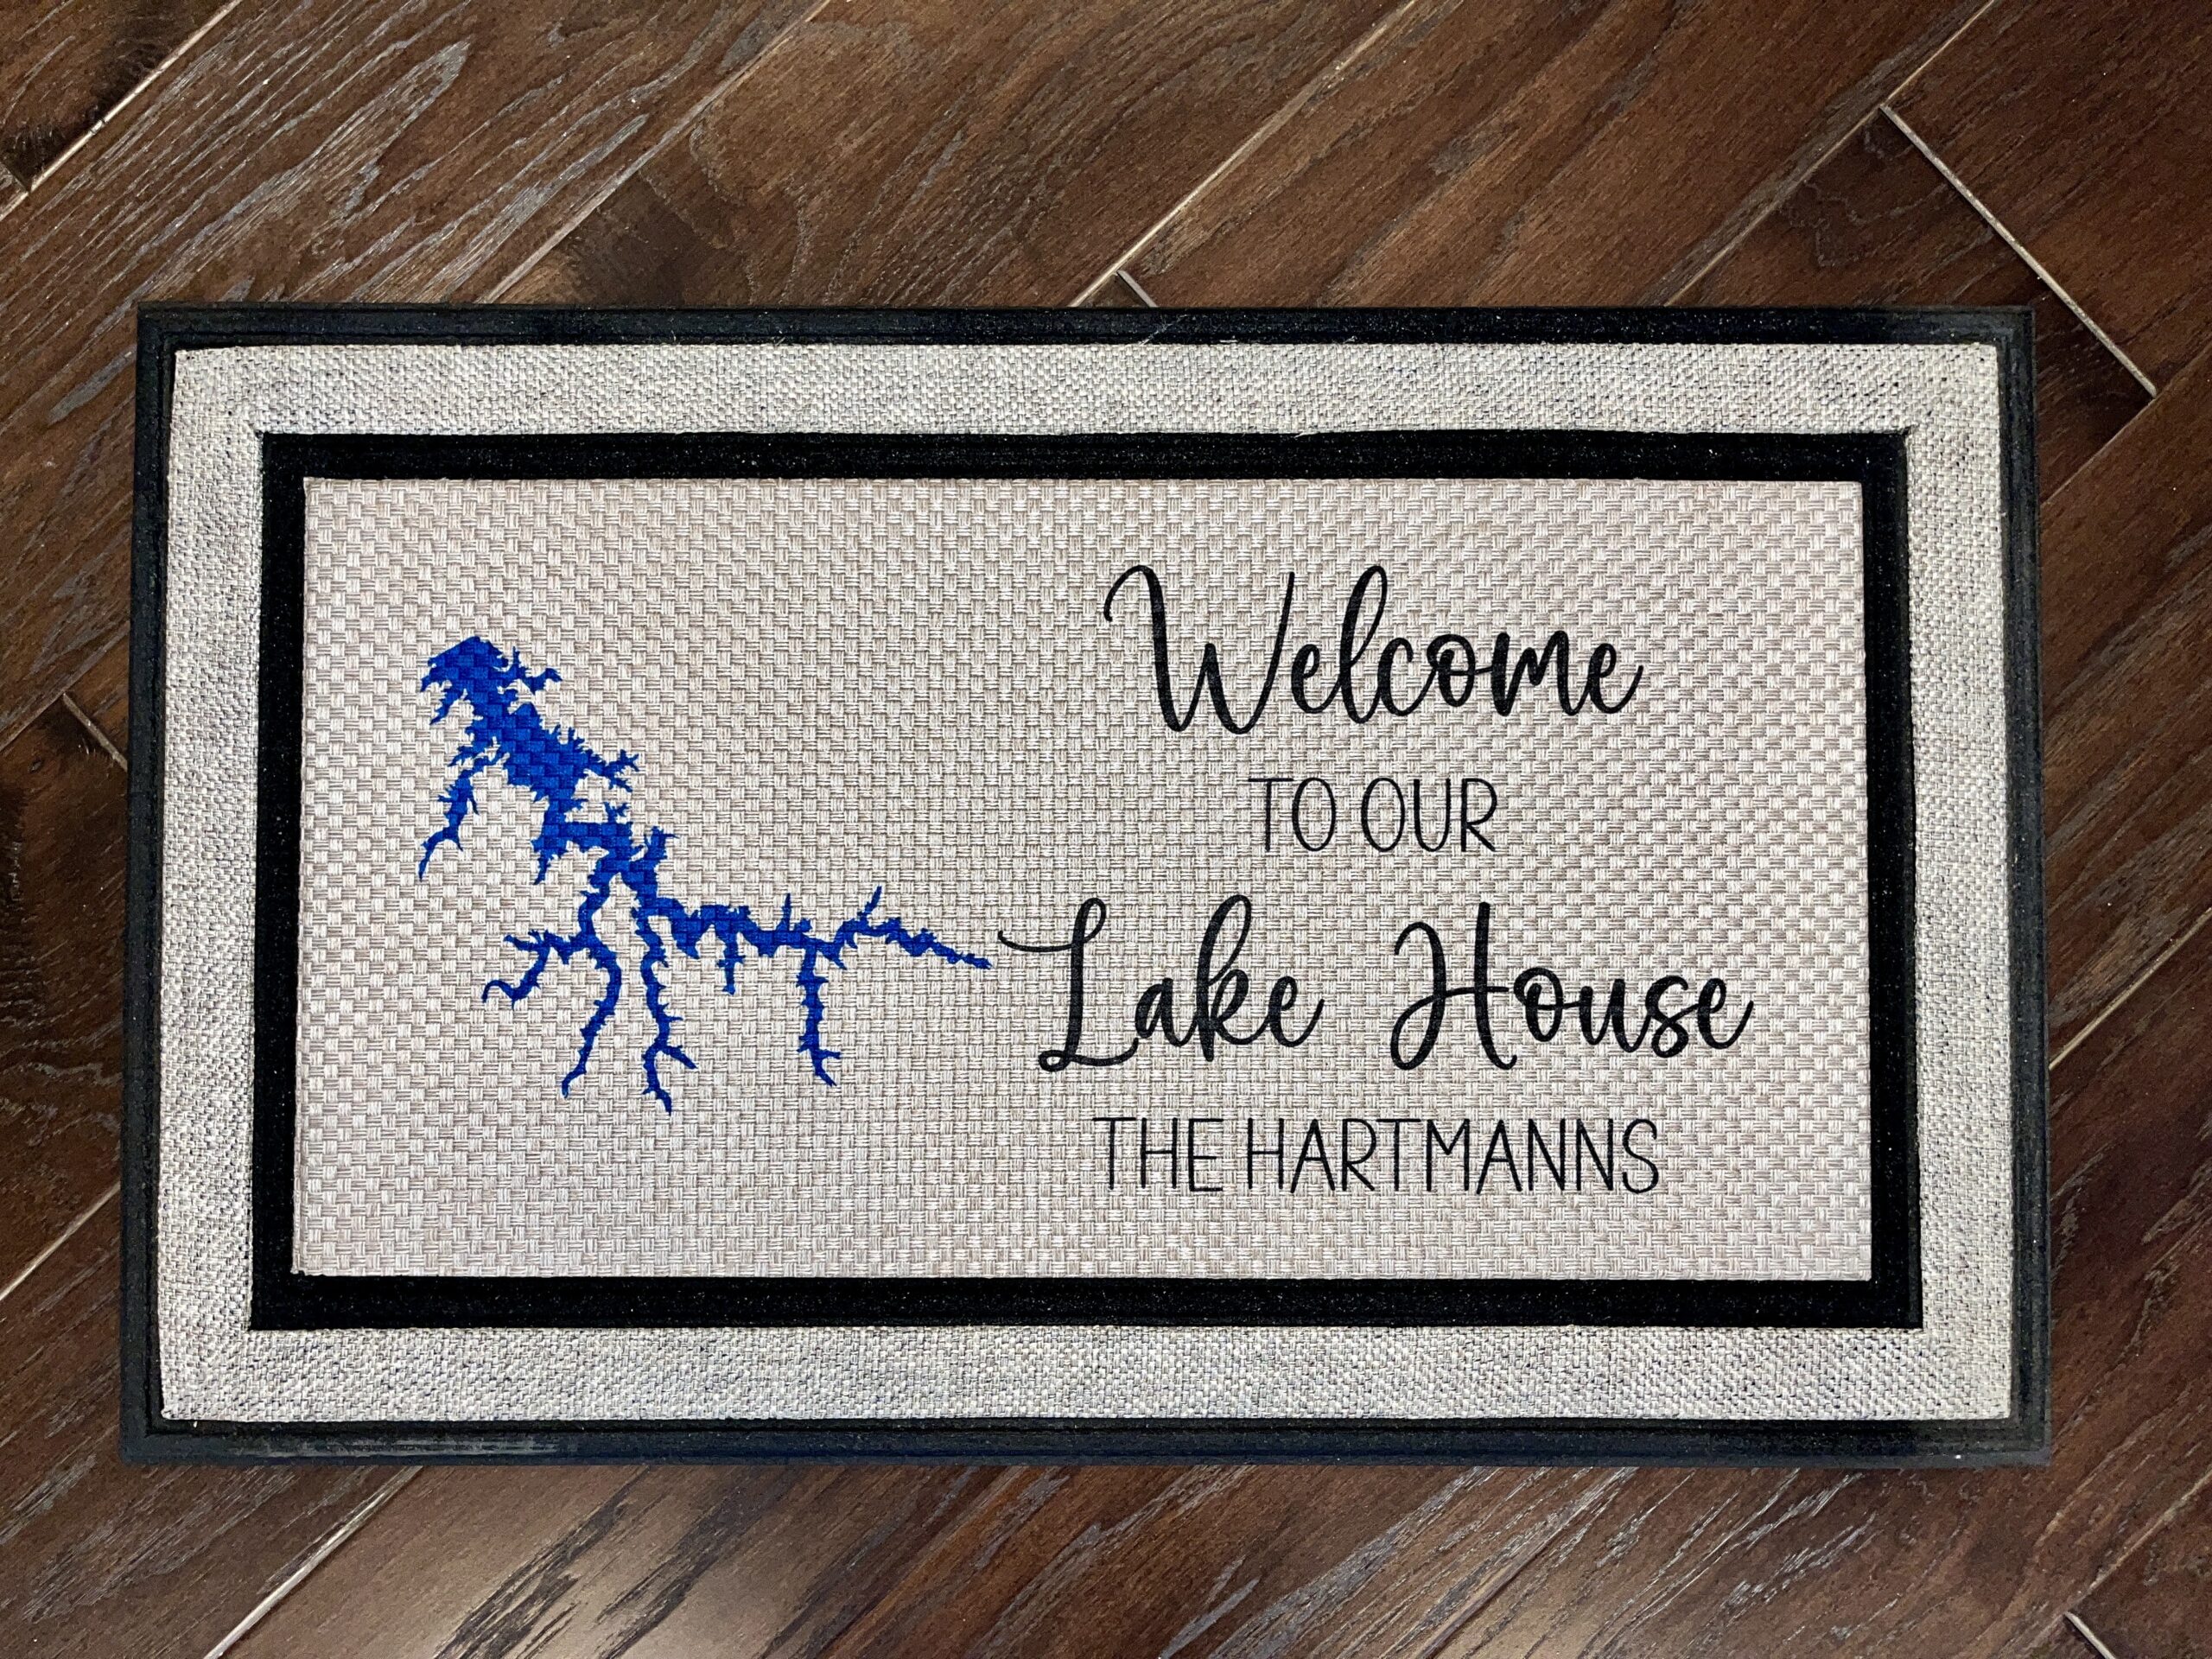 Client picture of custom Lake House doormat for Lake of Egypt